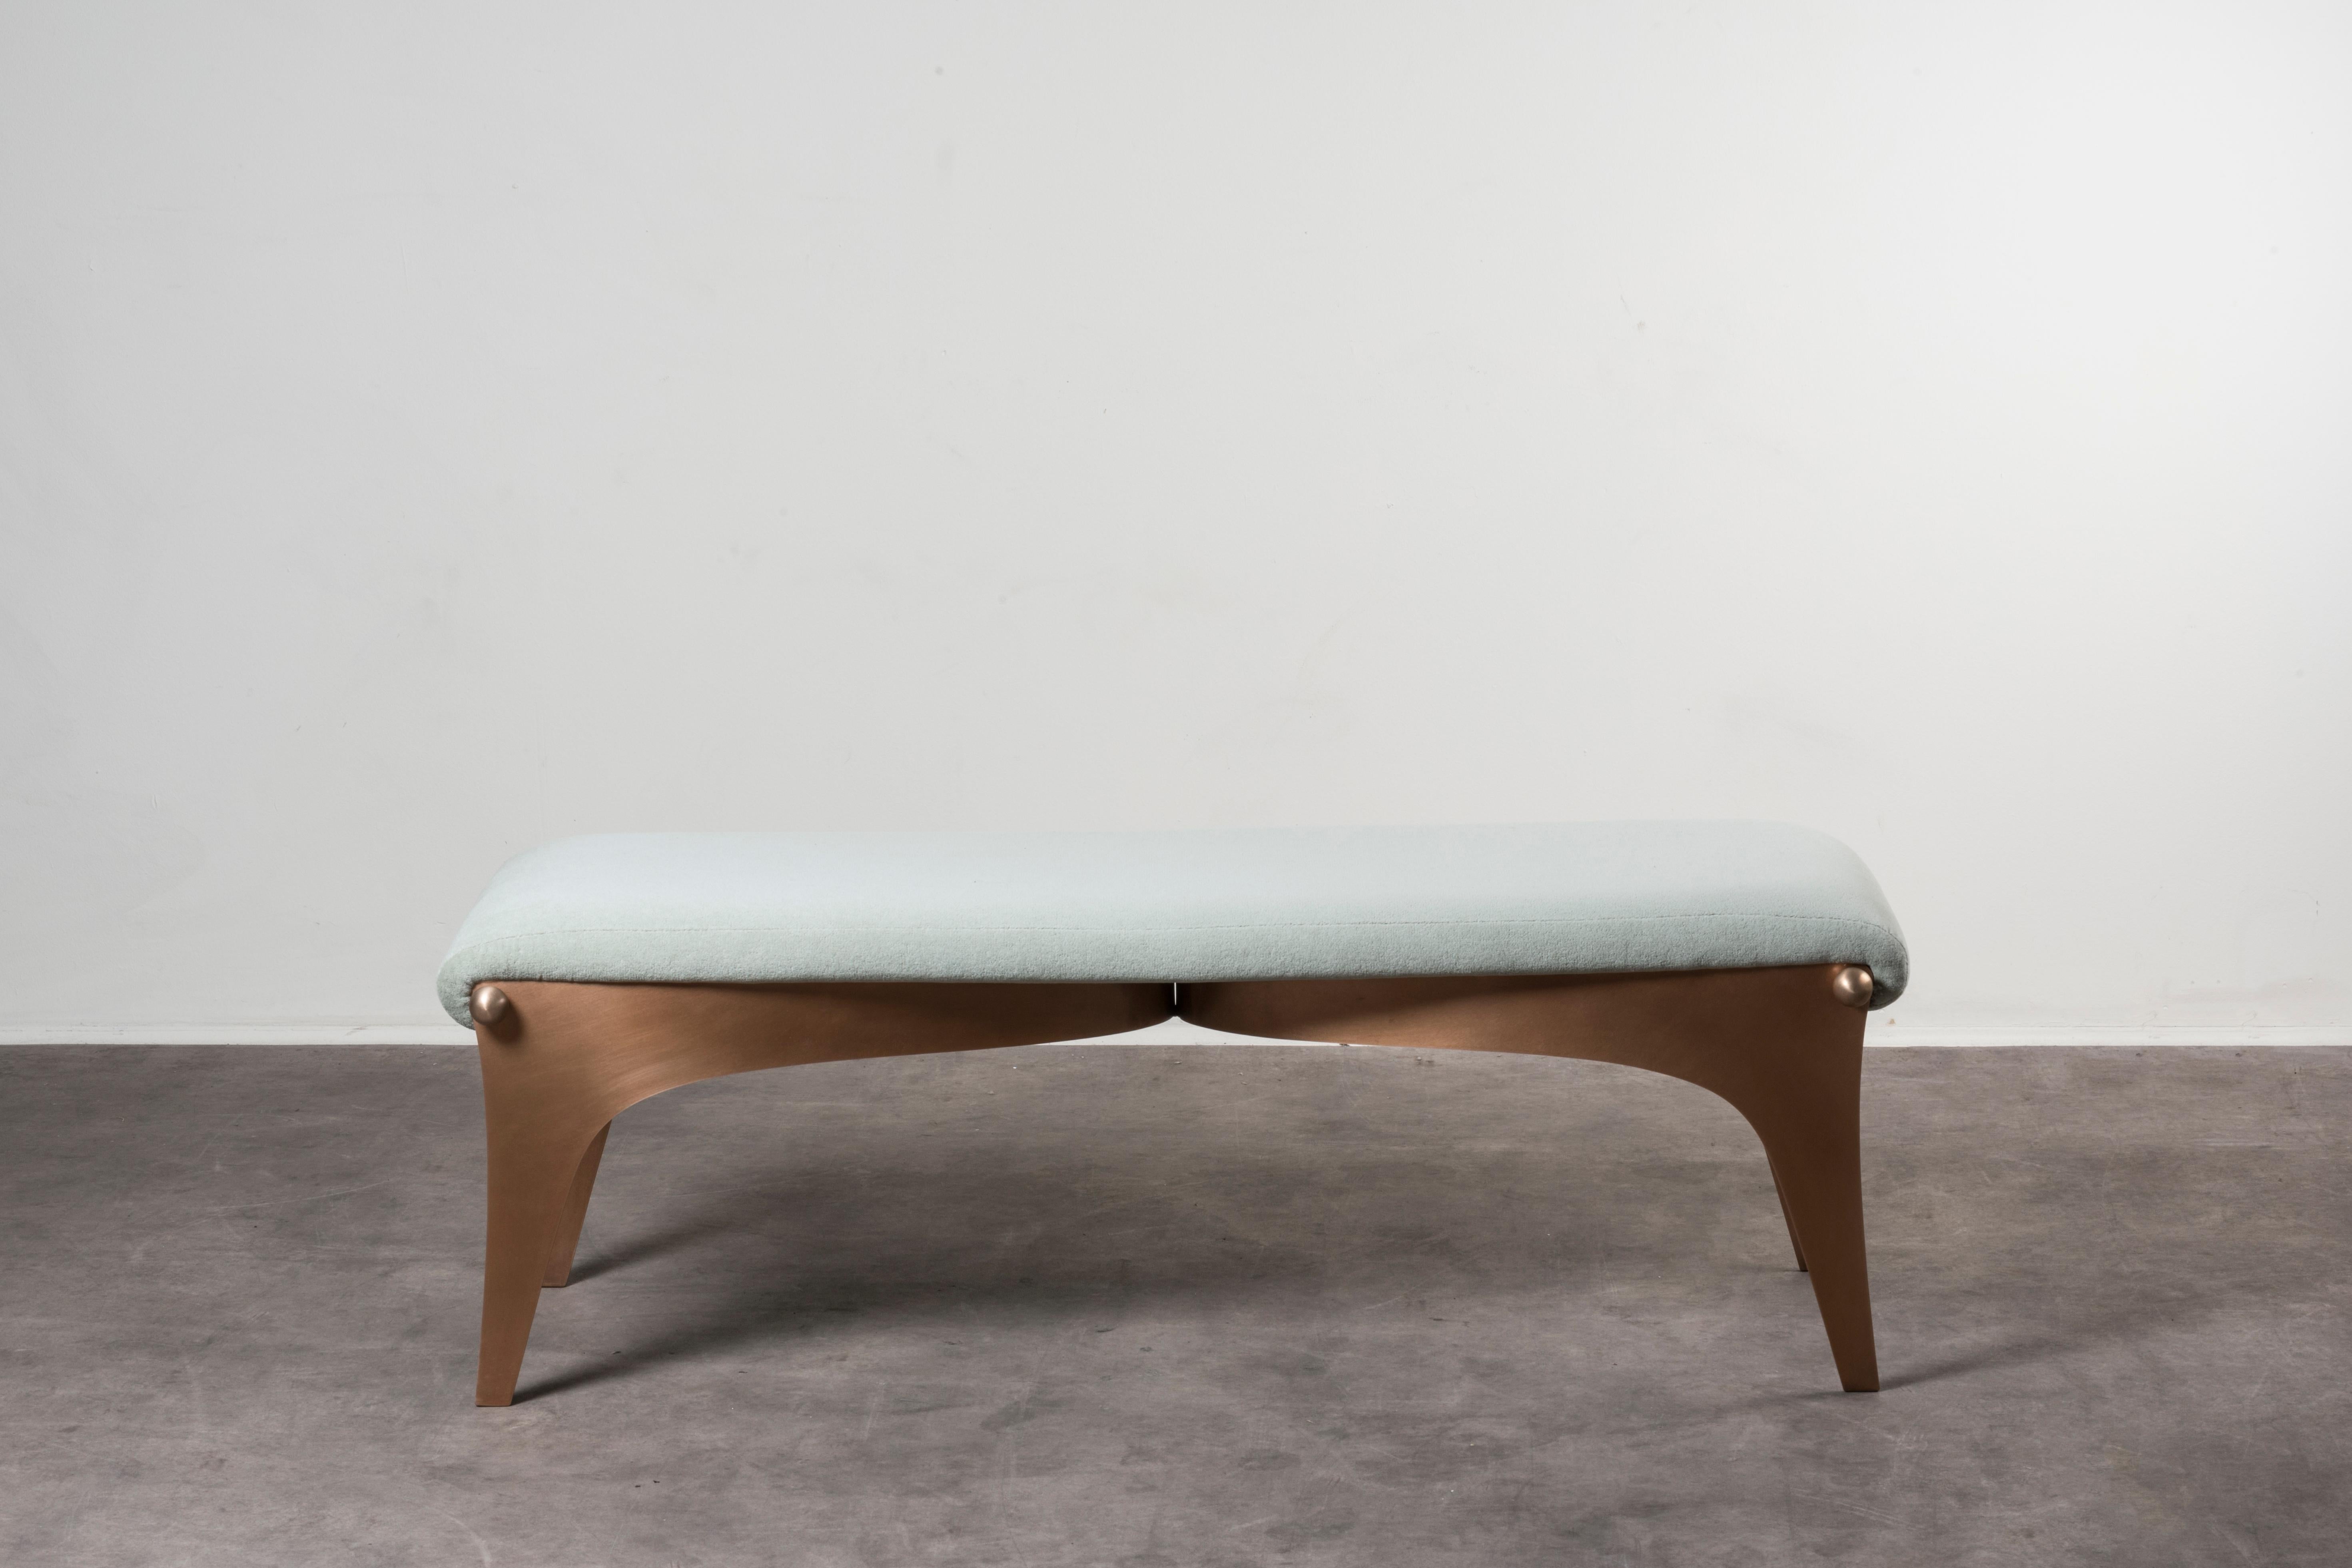 Bench by Analogia Project
Unfold collection. Italy, 2019. Nilufar edition. Bronze, velvet upholstery. Measures: 130 x 40.5 x H 45 cm. 51 x 16 x 18 in.
Please note: Prices do not include VAT. VAT may be applied depending on the ship-to location.